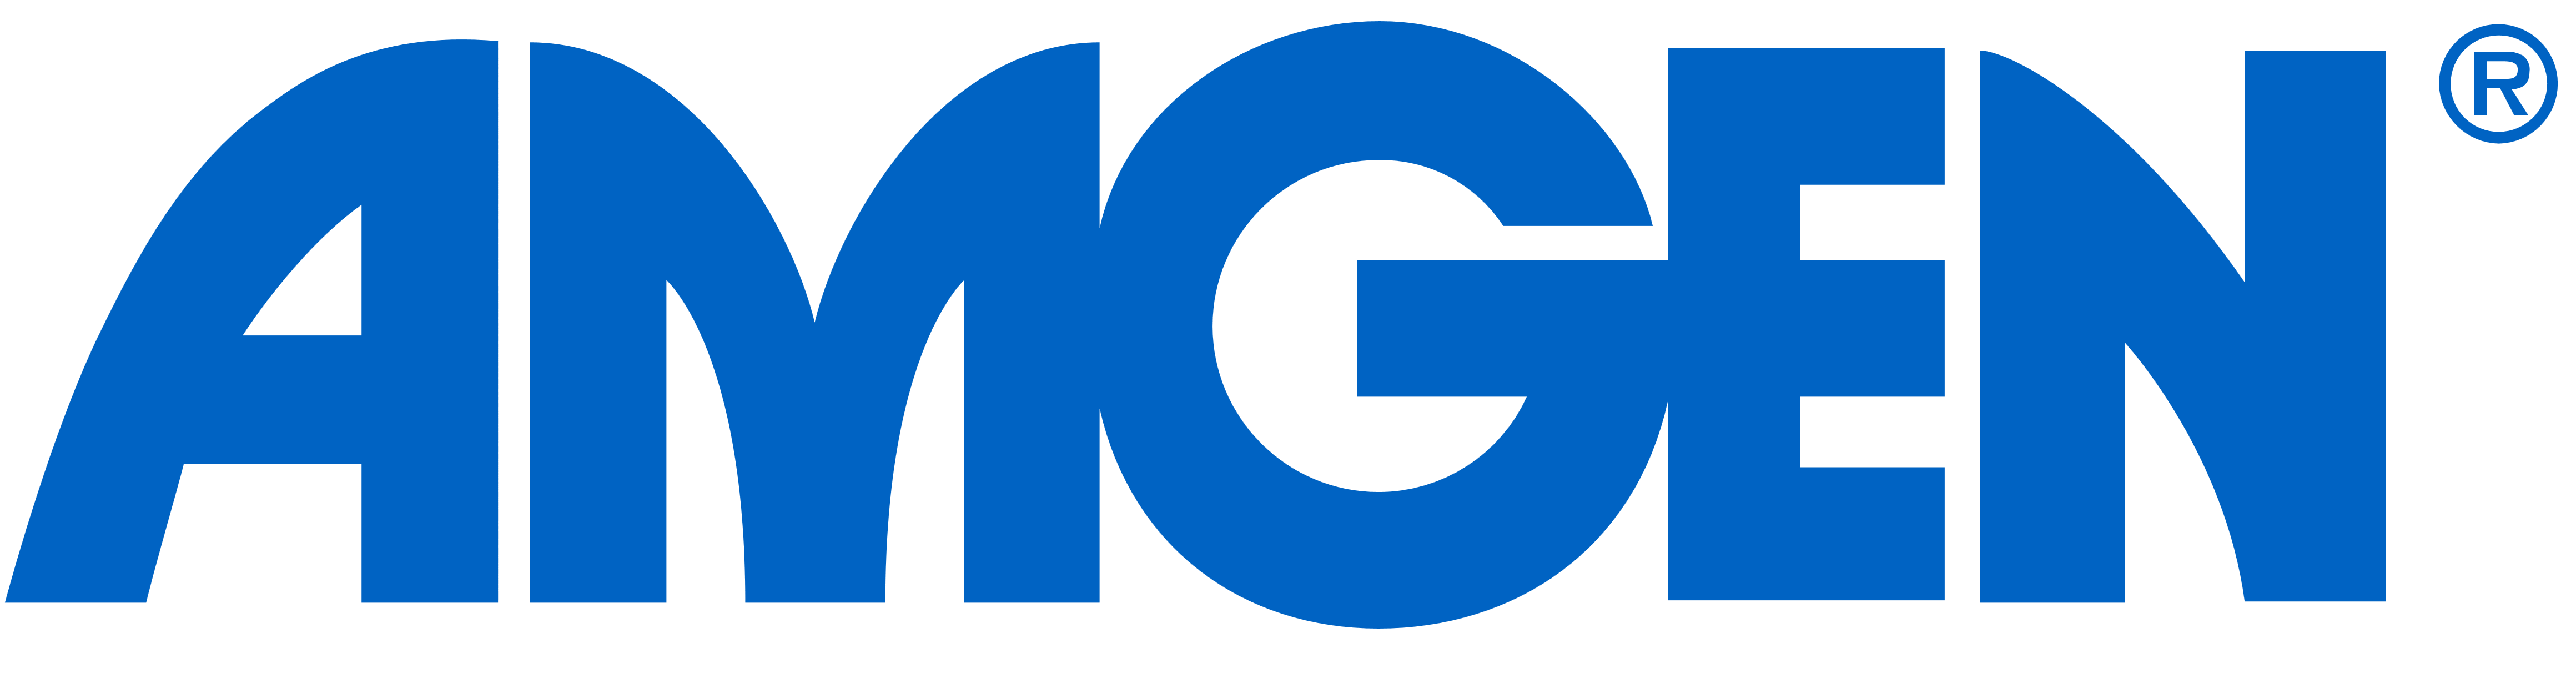 Image of company logo with text 'Amgen'